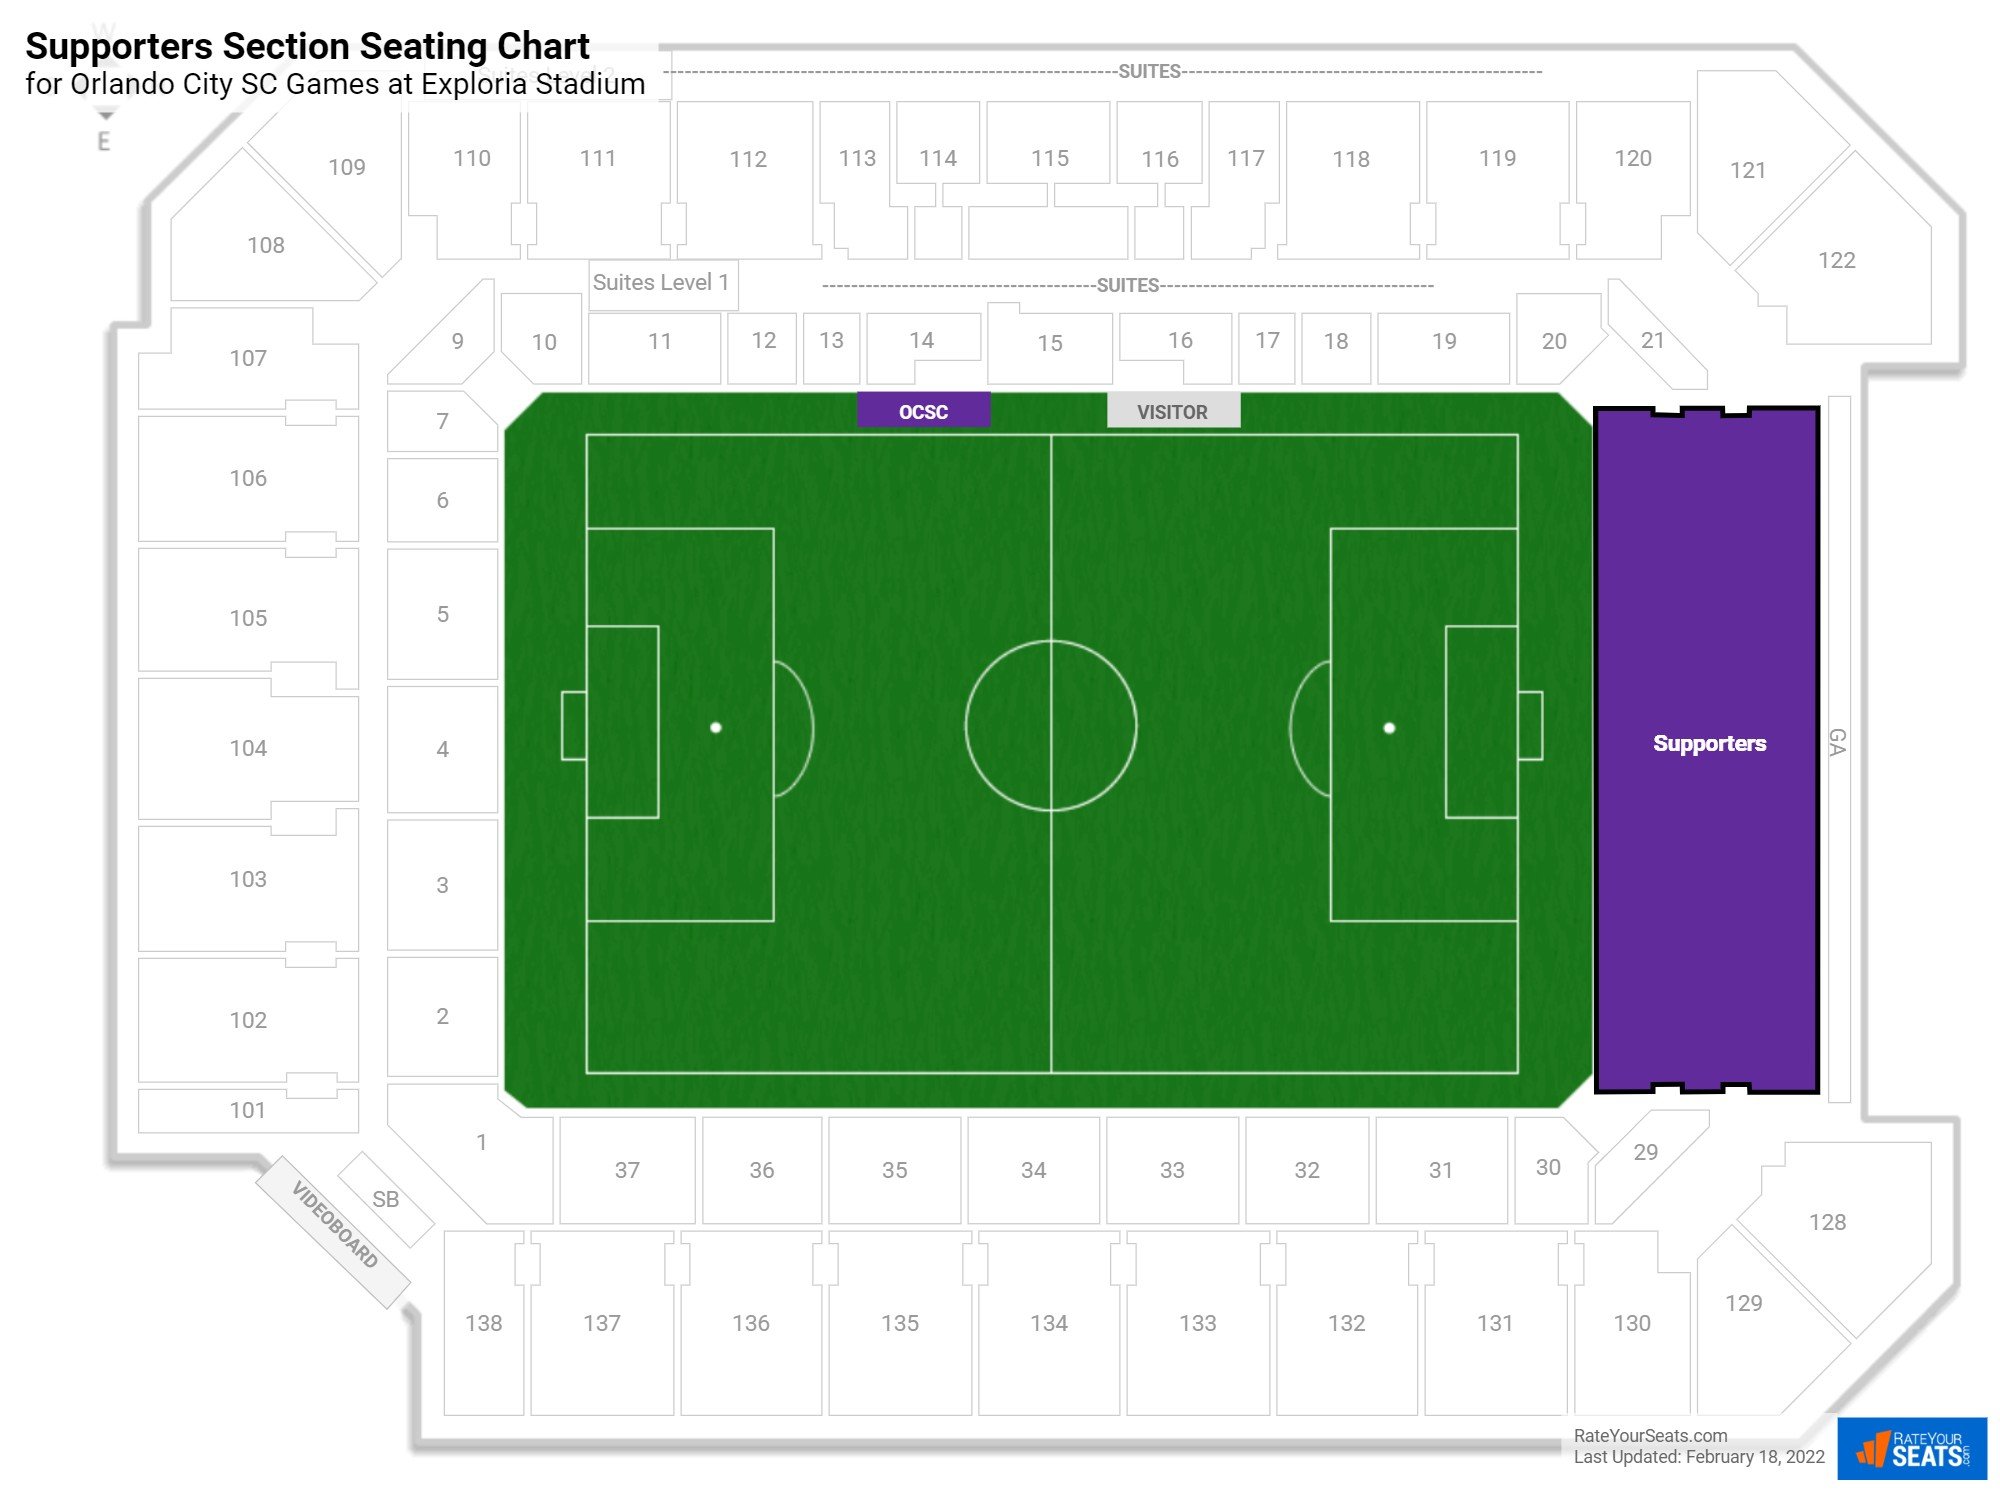 Orlando City SC Supporters Section Seating Chart at Exploria Stadium